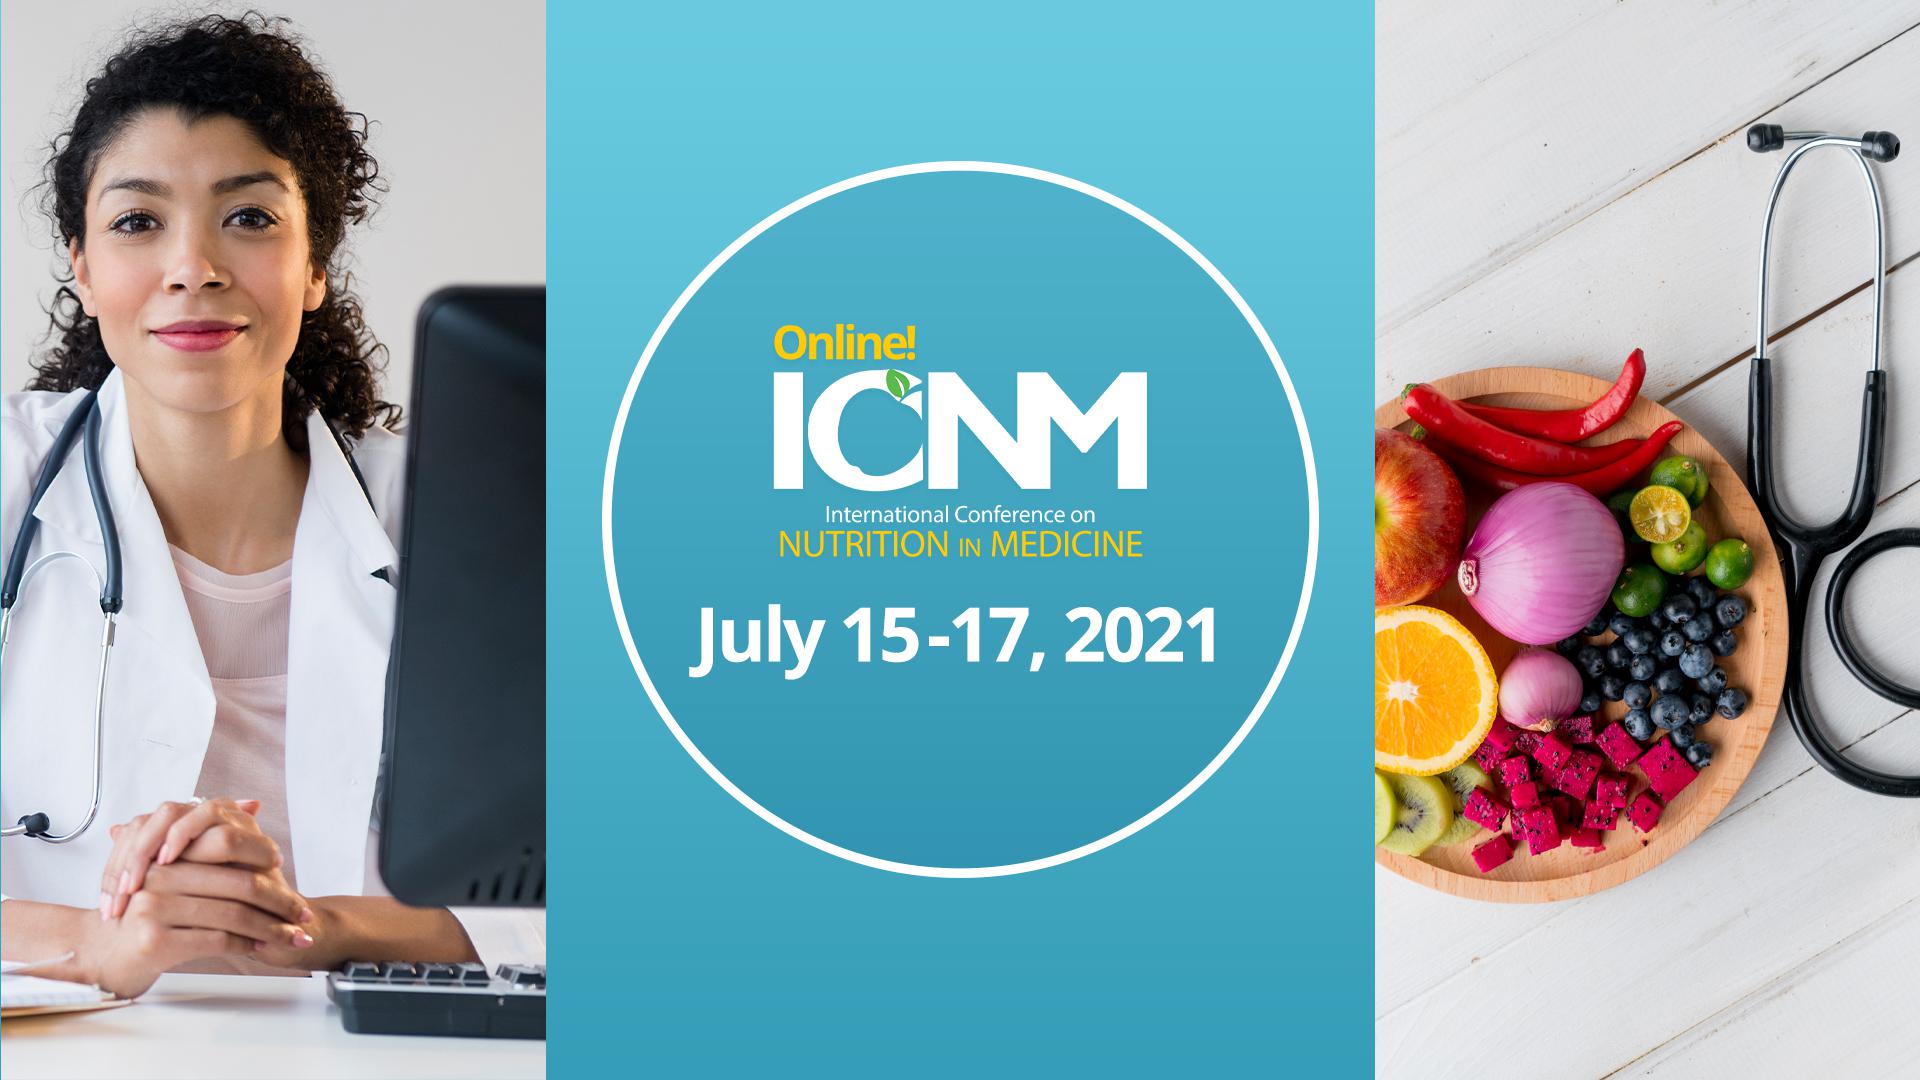 International Conference on Nutrition in Medicine 2021